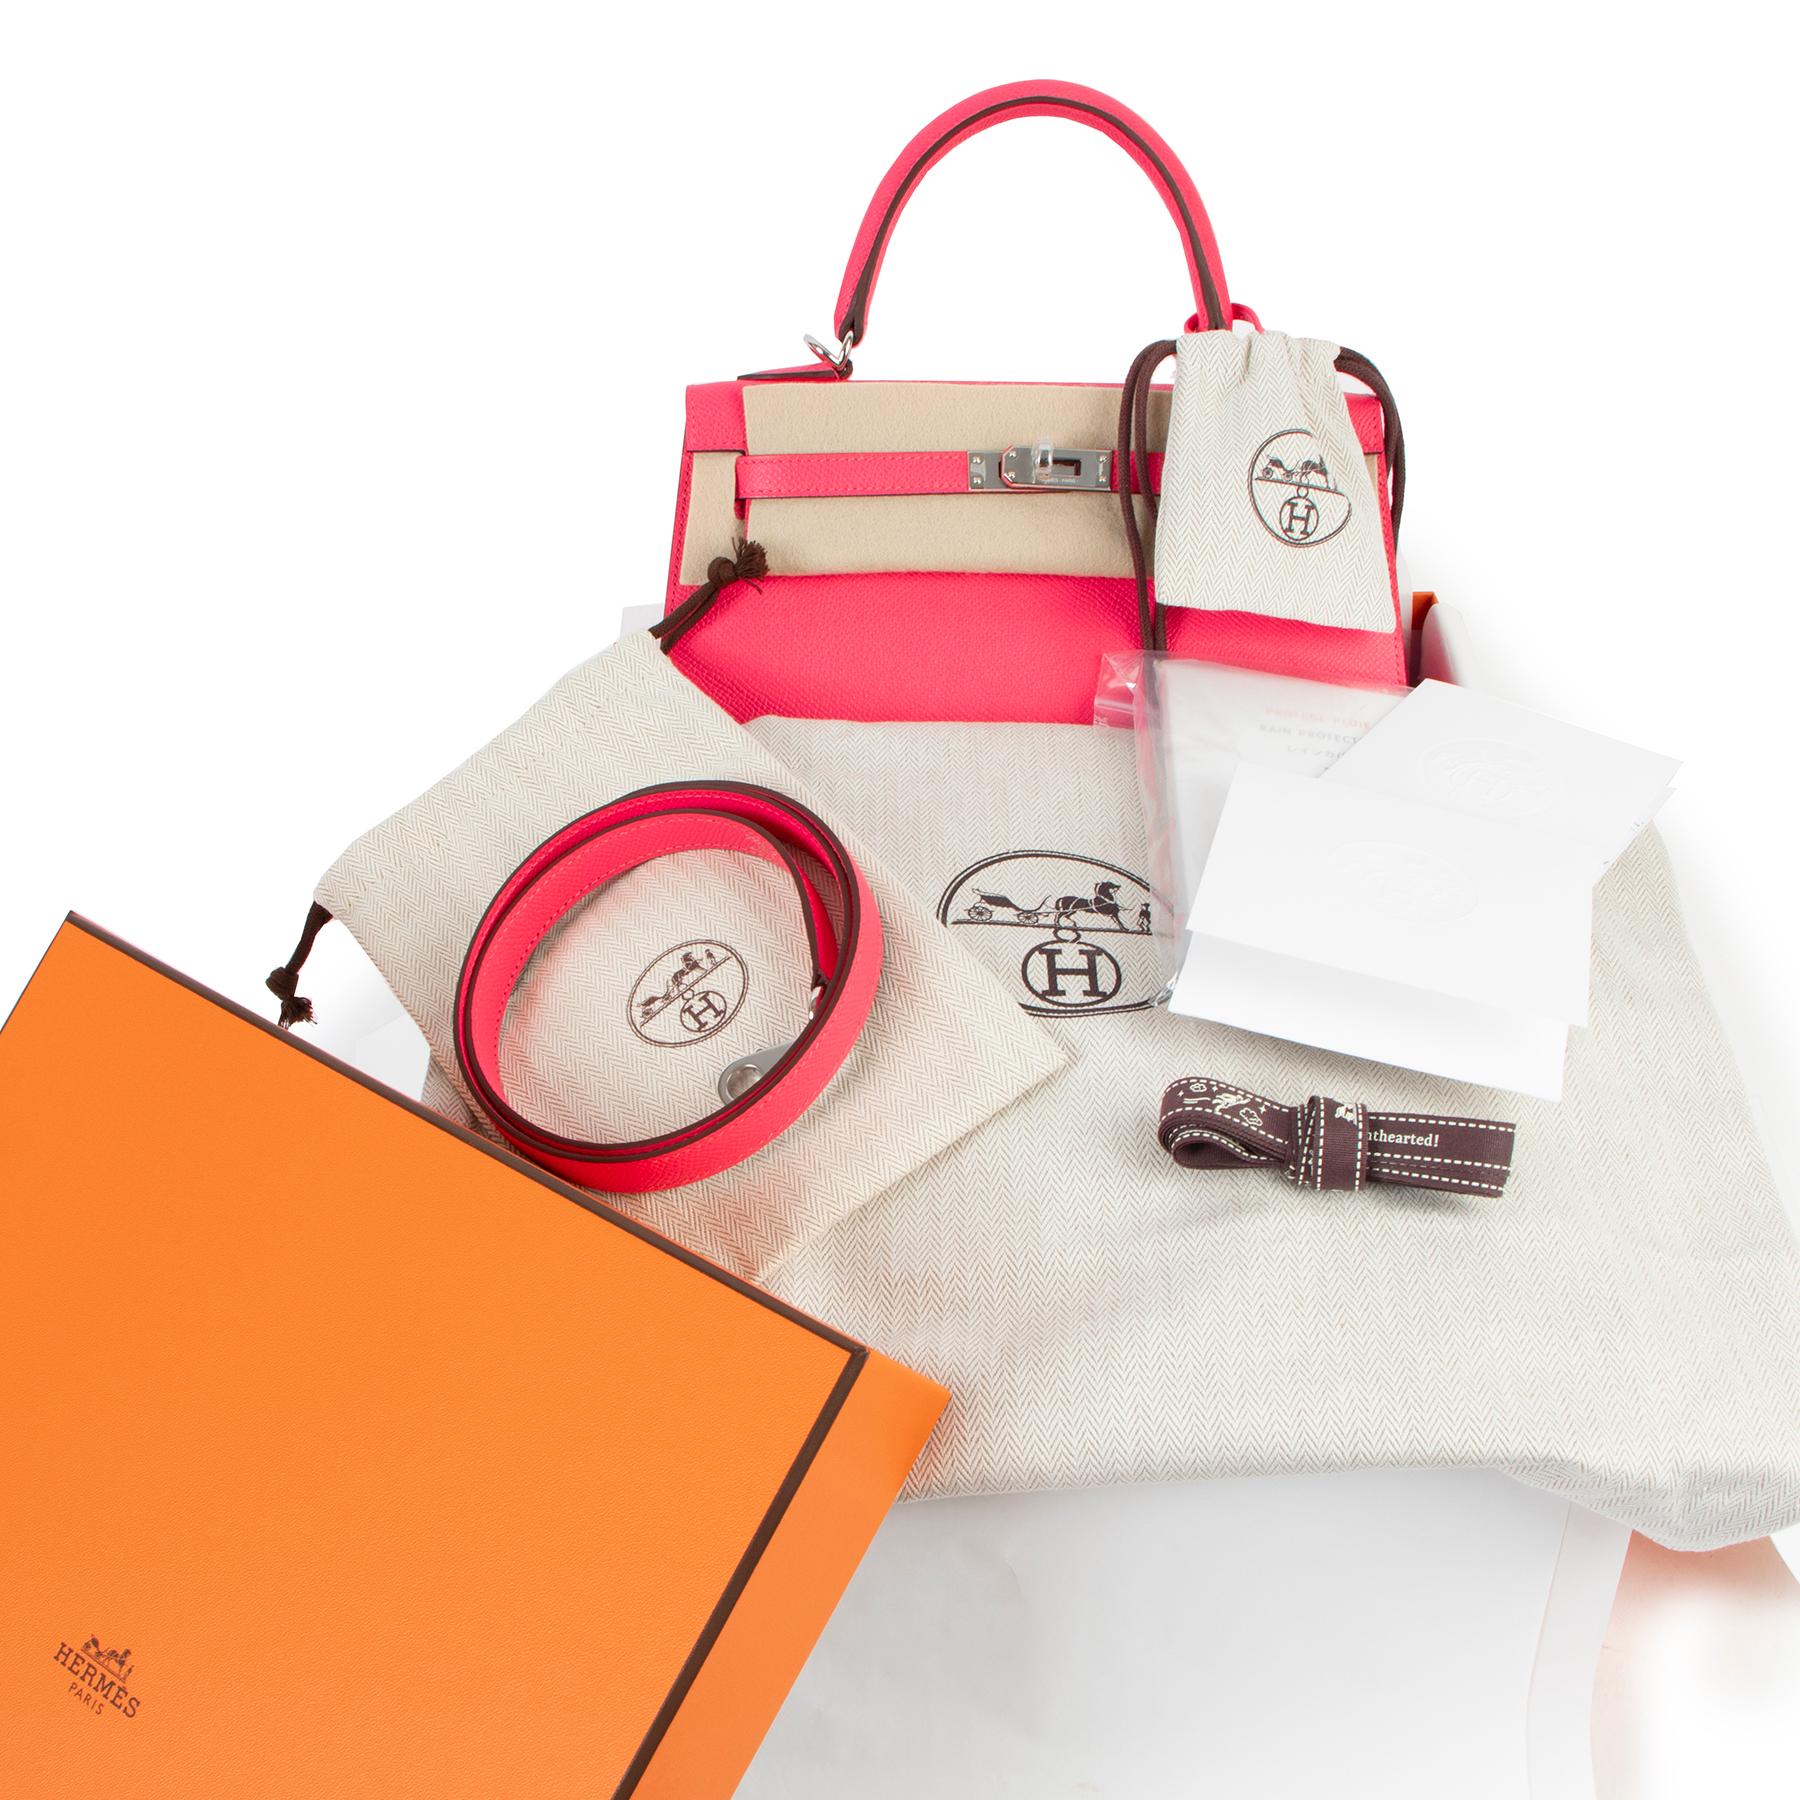 BRAND NEW Hermès Kelly 25 Sellier Rose Azalee Veau Epsom PHW

And just like that, this pink beauty arrived! Perfect to uplift all of your summer outfits.
This Kelly 25 in Rose Azalee is crafted from Veau Epsom leather in Sellier and this featured by